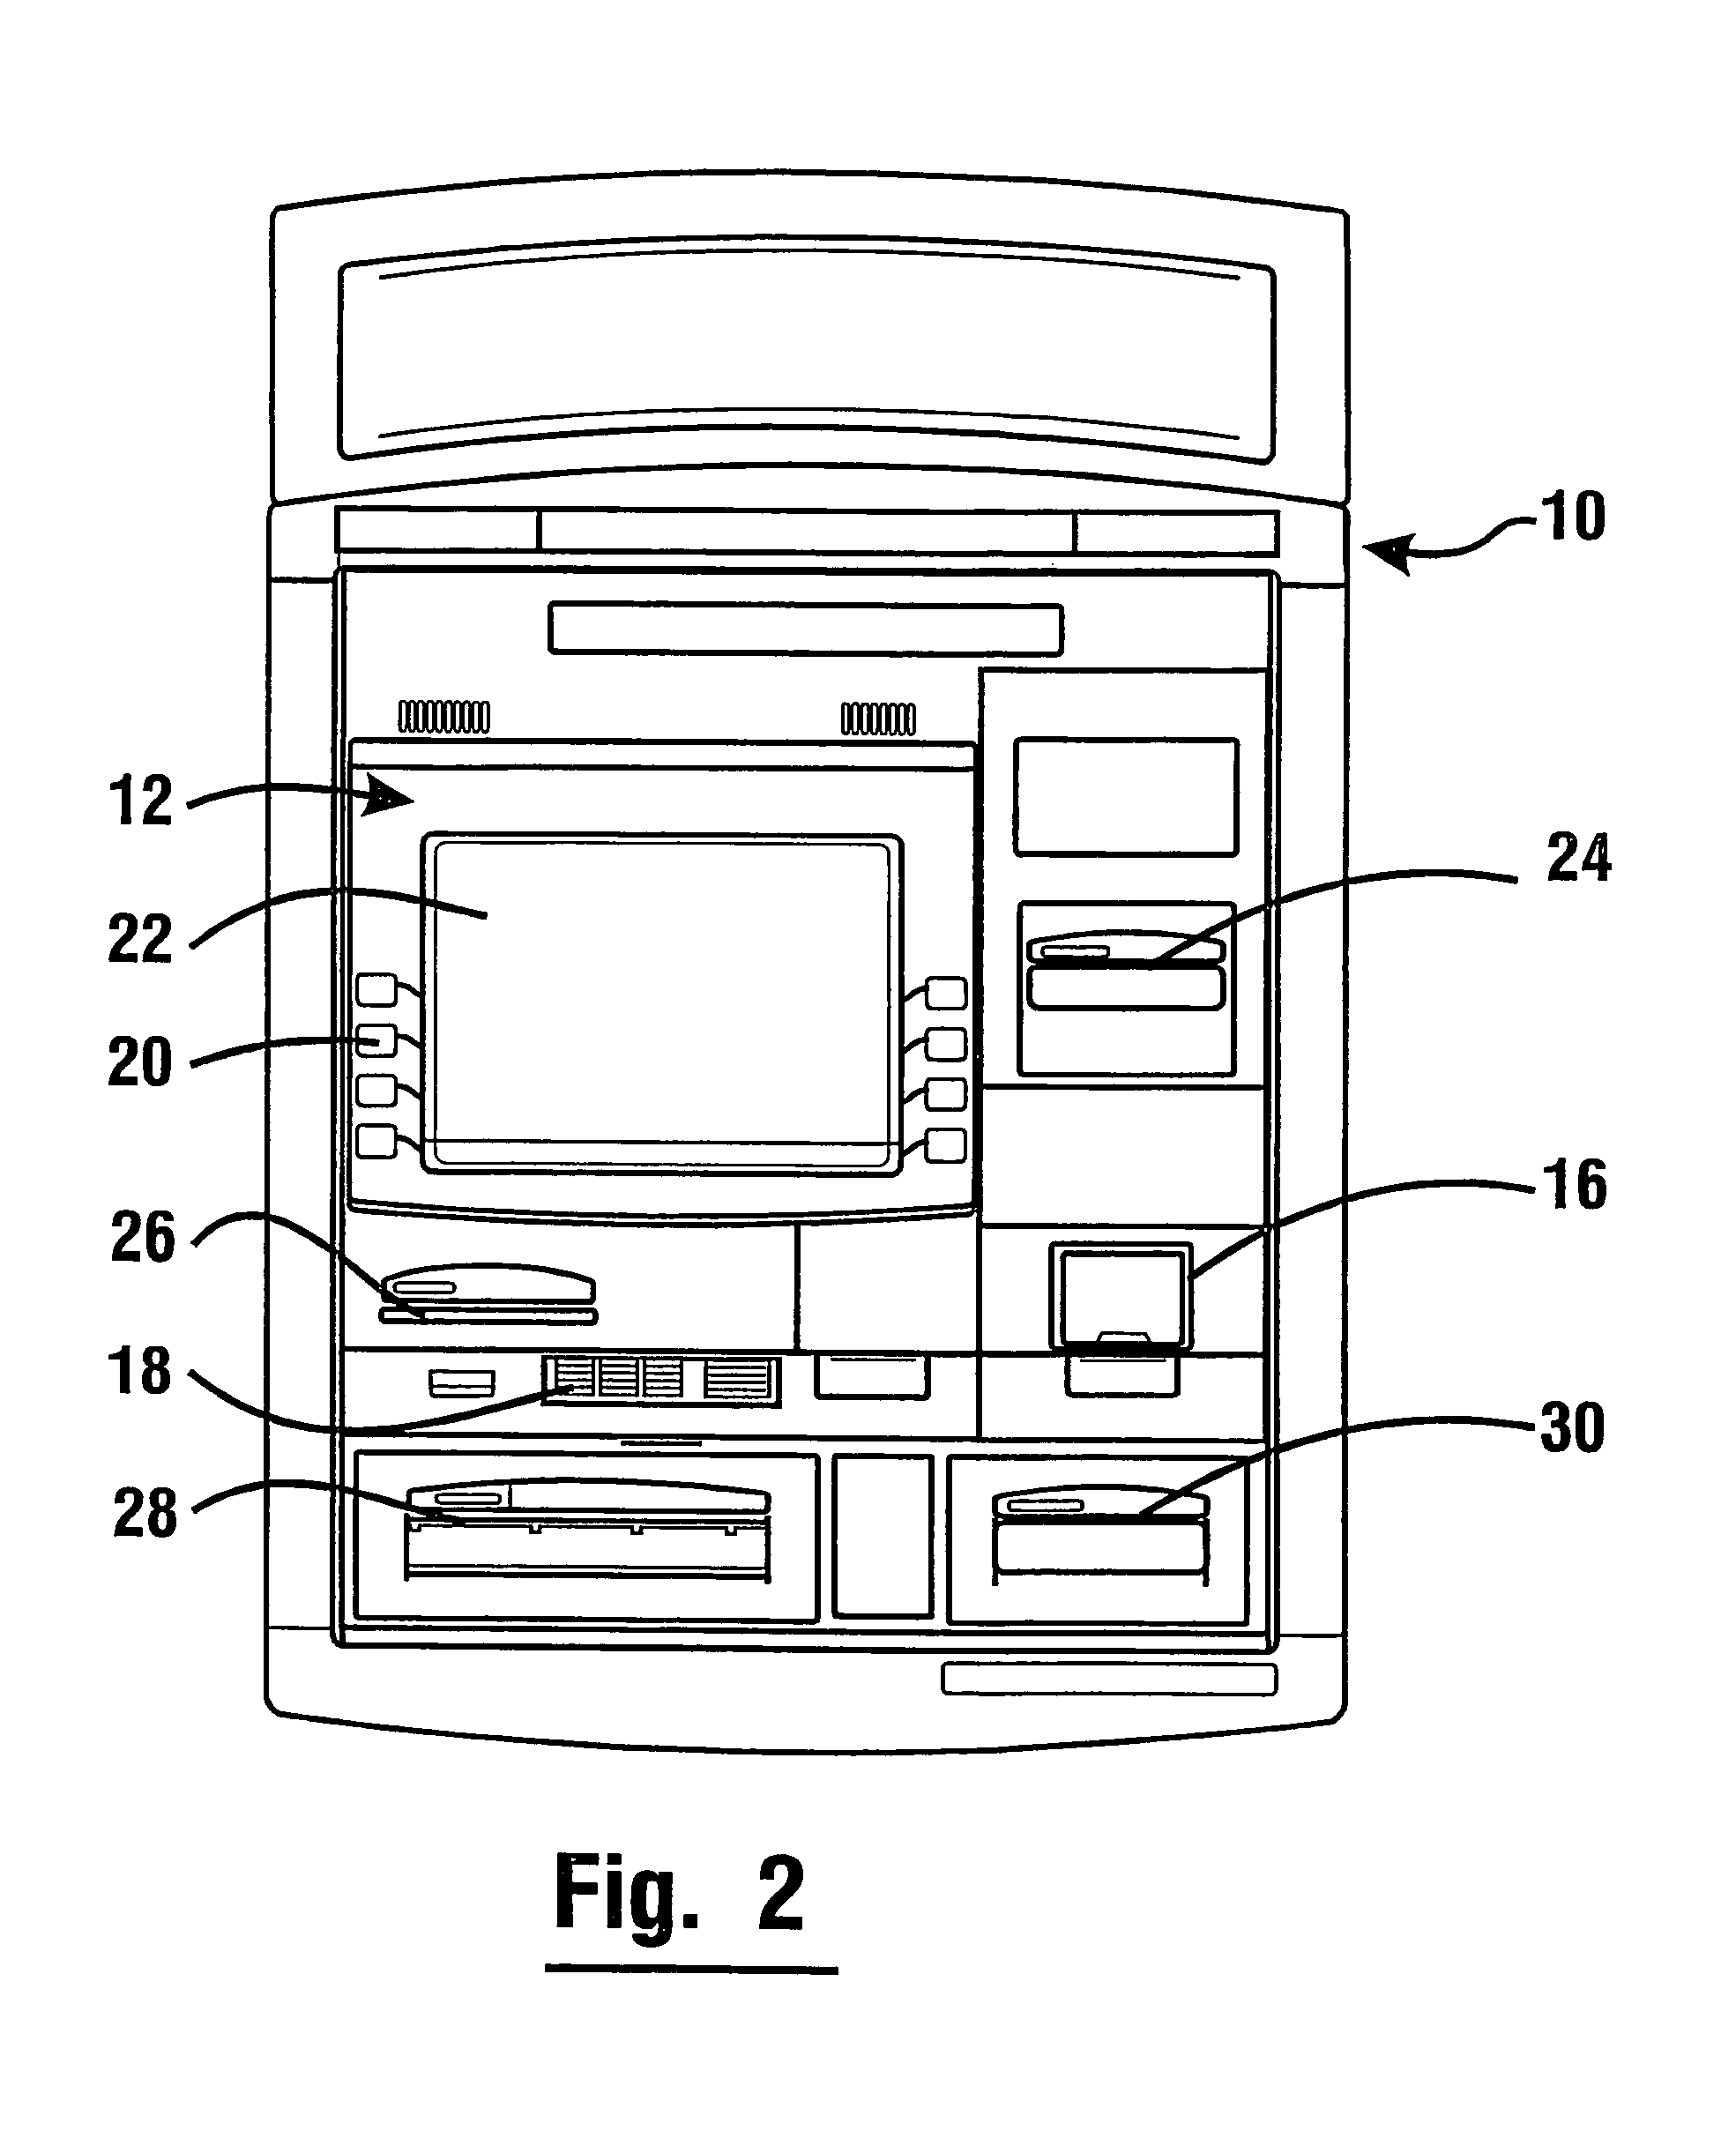 Automated banking machine with noncontact reading of card data